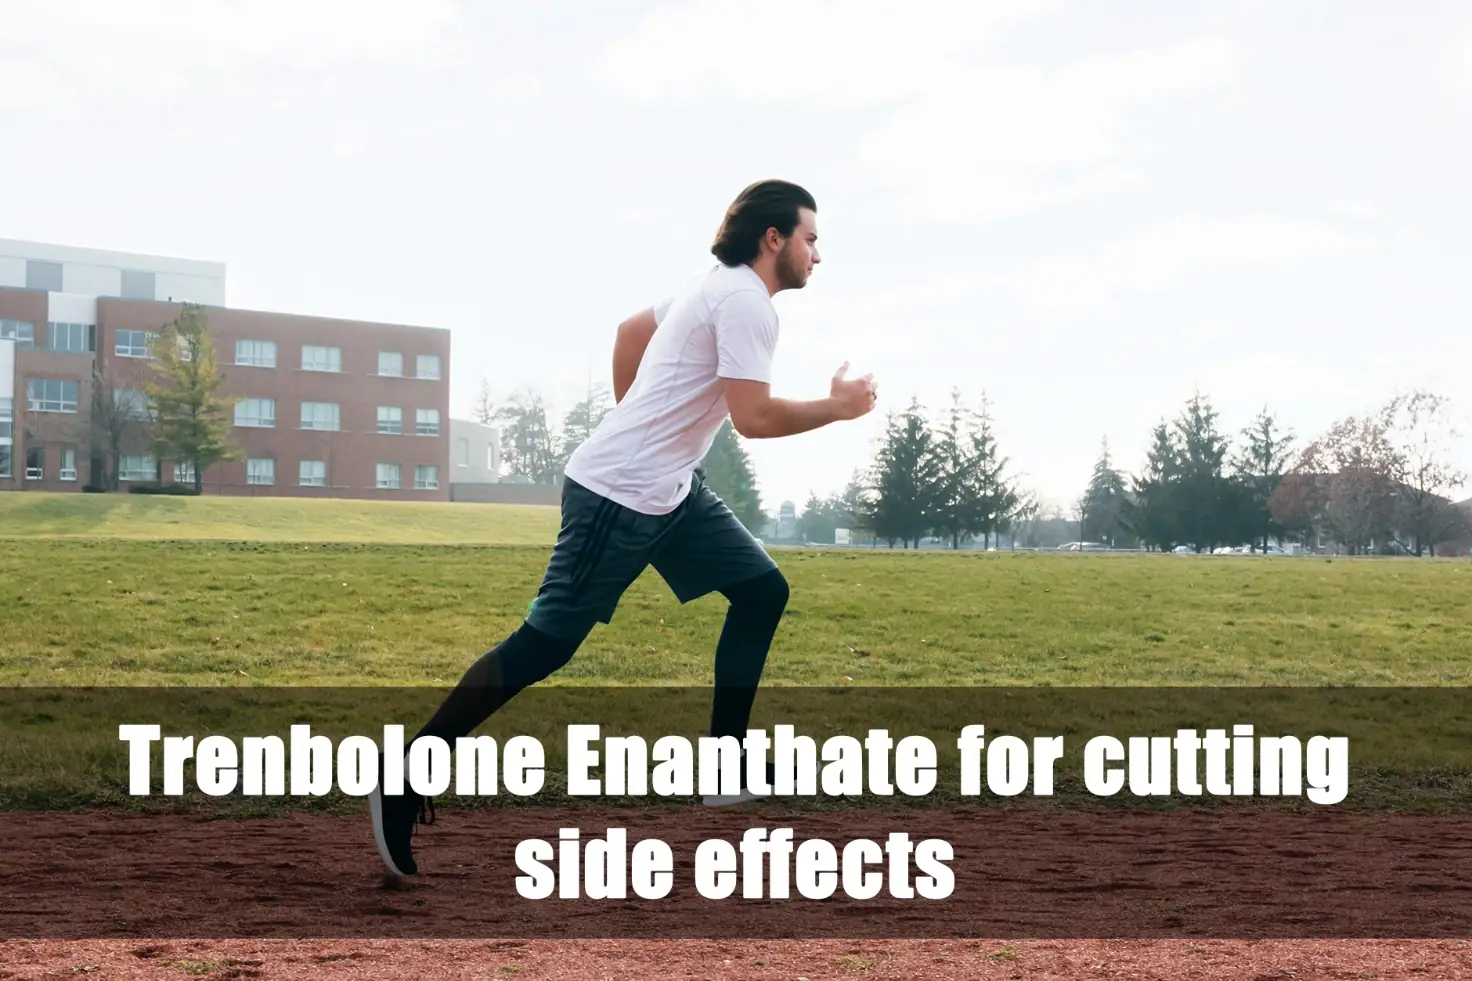 Trenbolone Enanthate cutting side effects